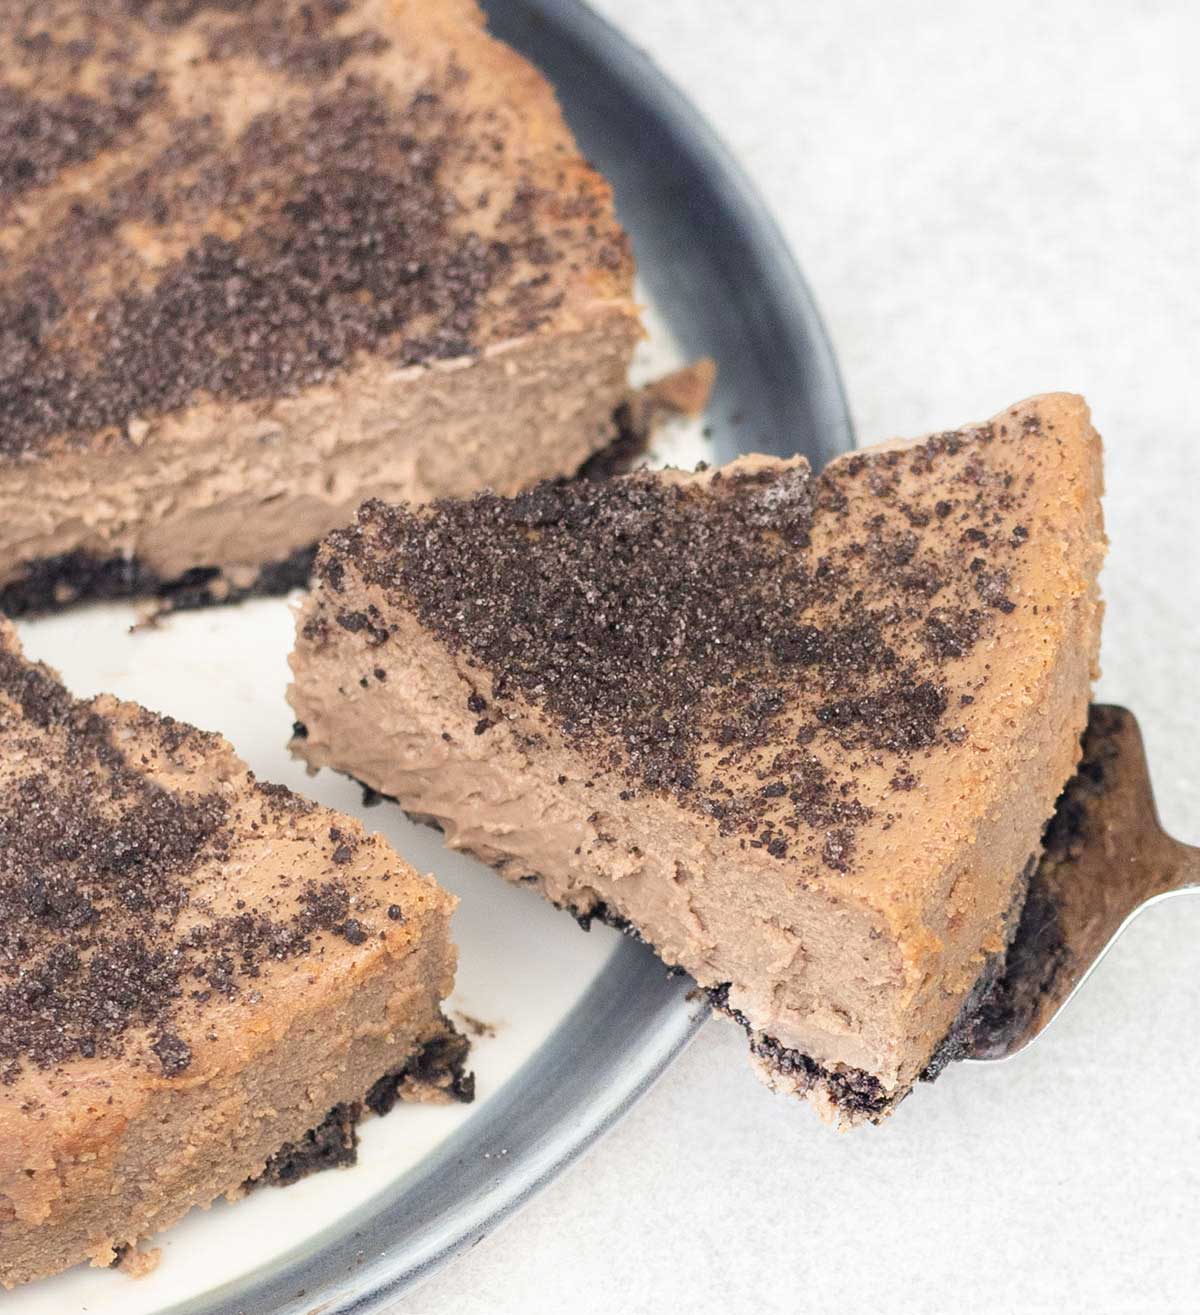 Cut the baked chocolate cheesecake.